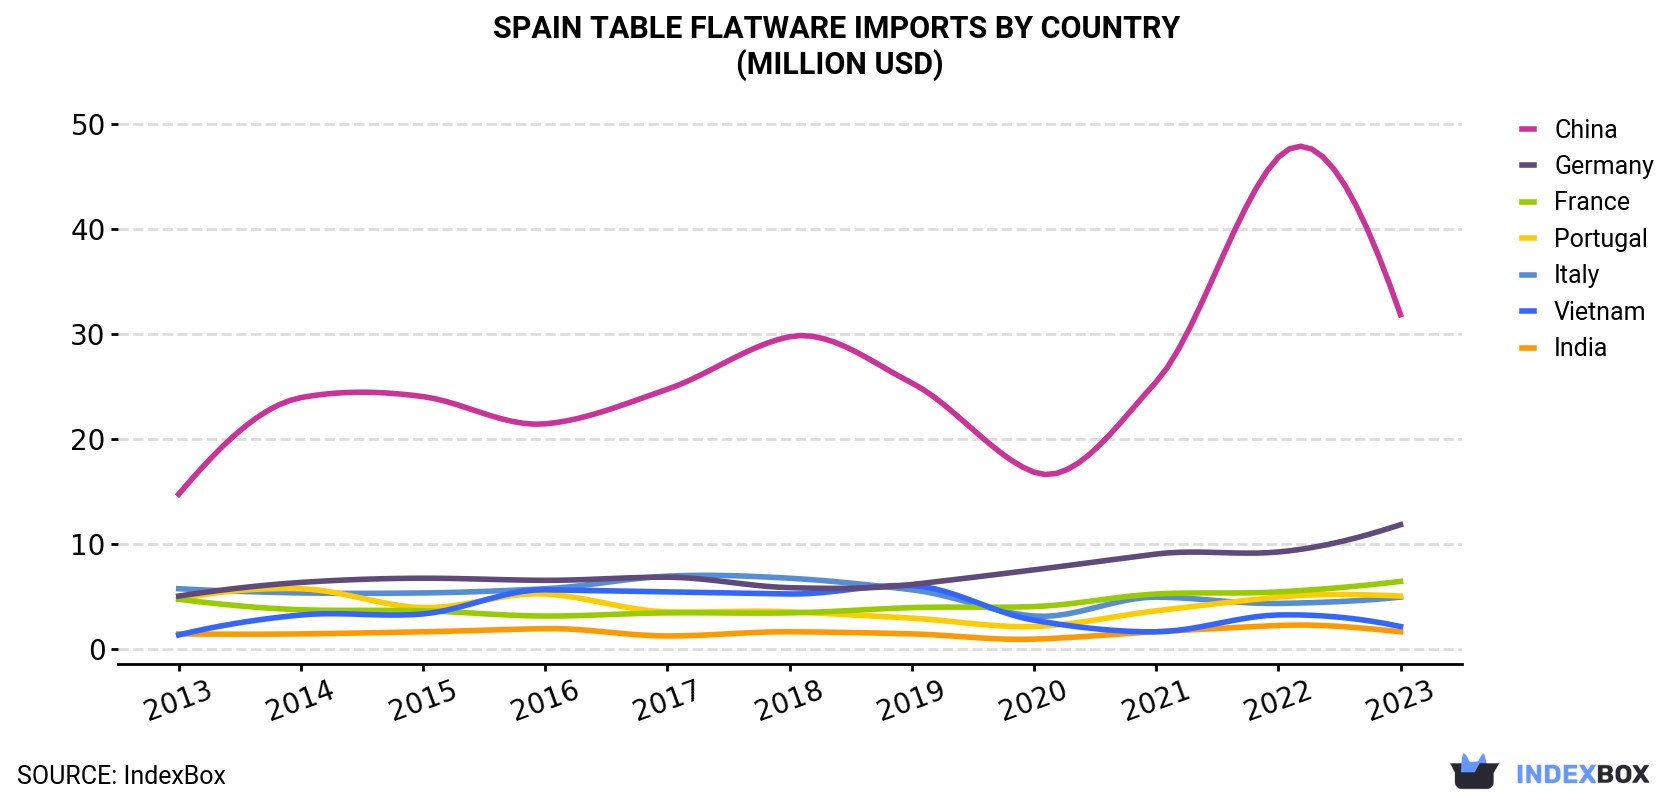 Spain Table Flatware Imports By Country (Million USD)